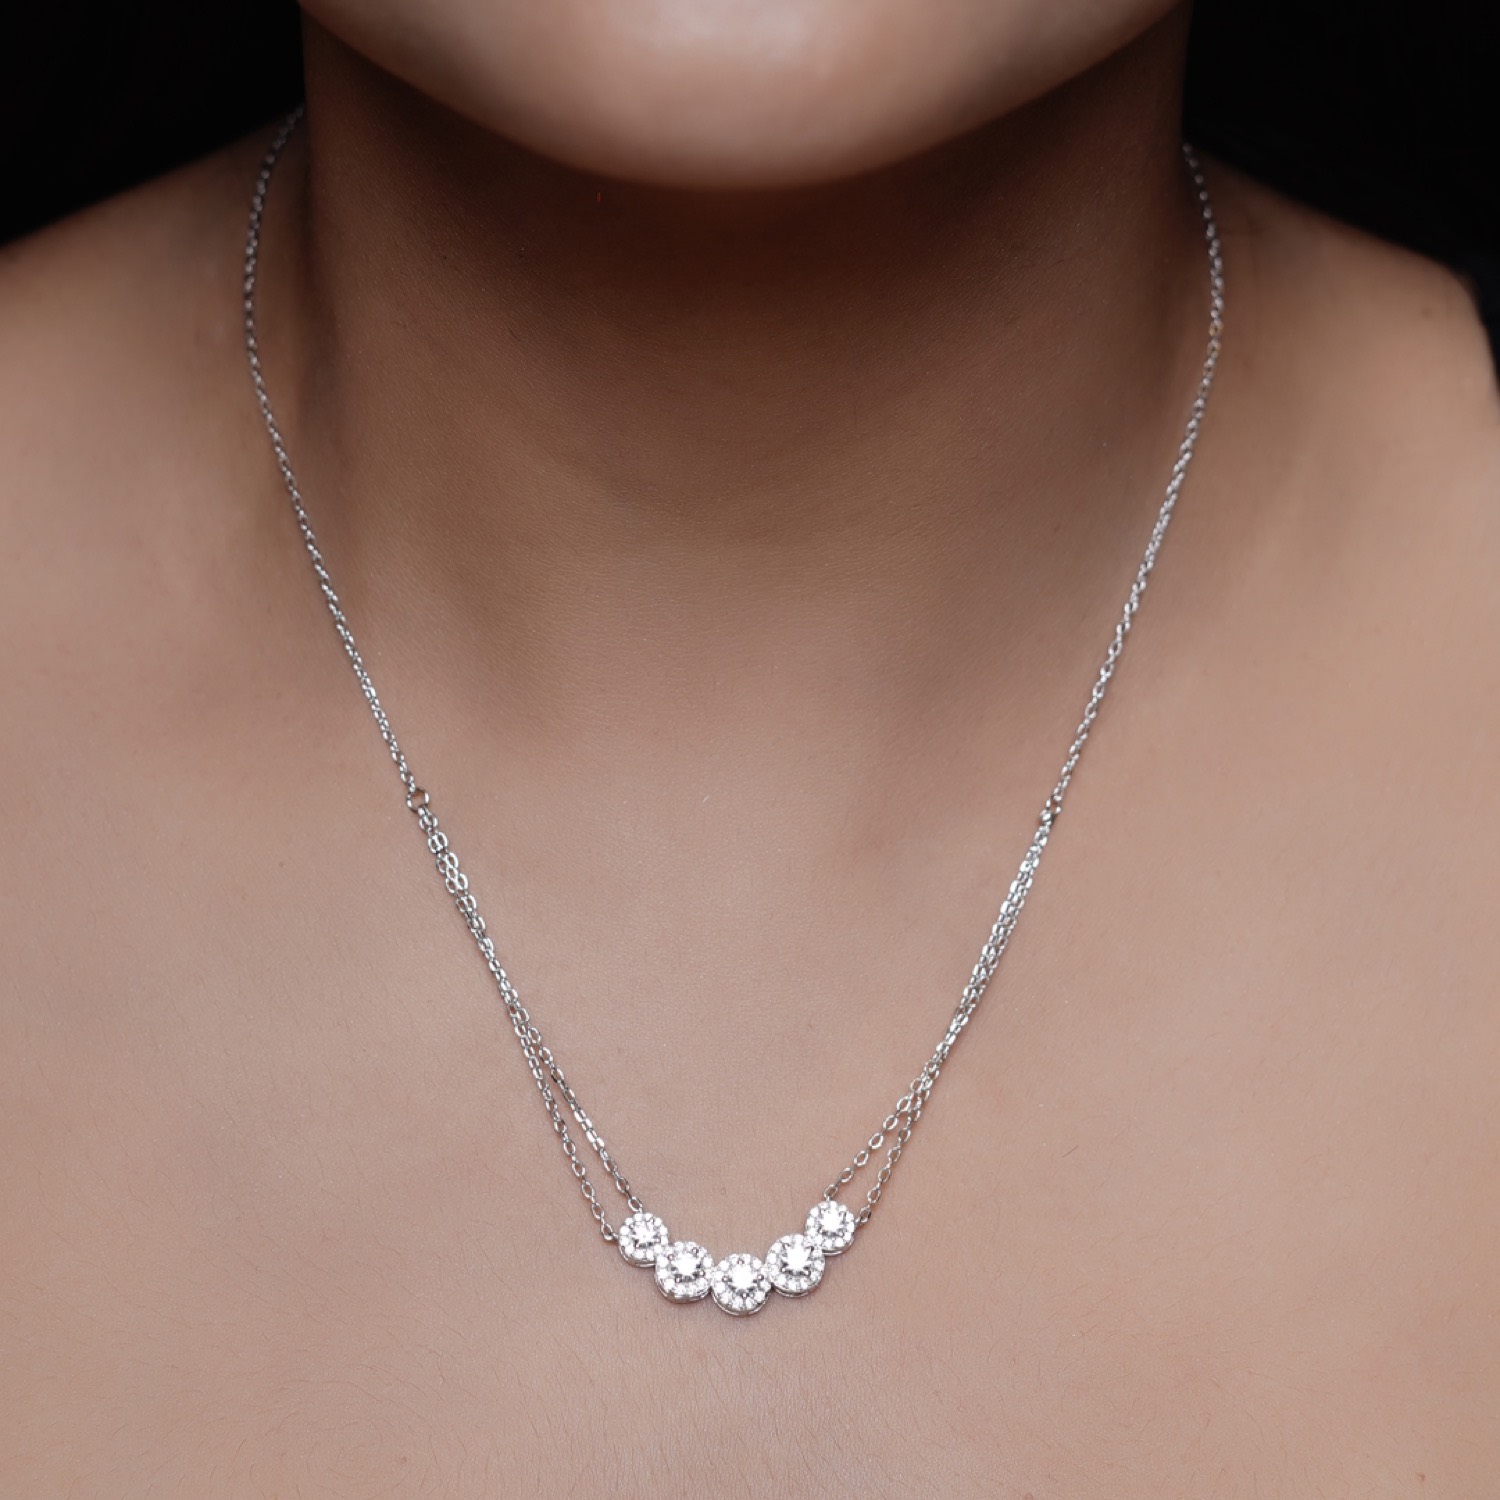 varam_chain_102022_curve_shaped_white_stone_pendant_with_two_layered_silver_chain-2